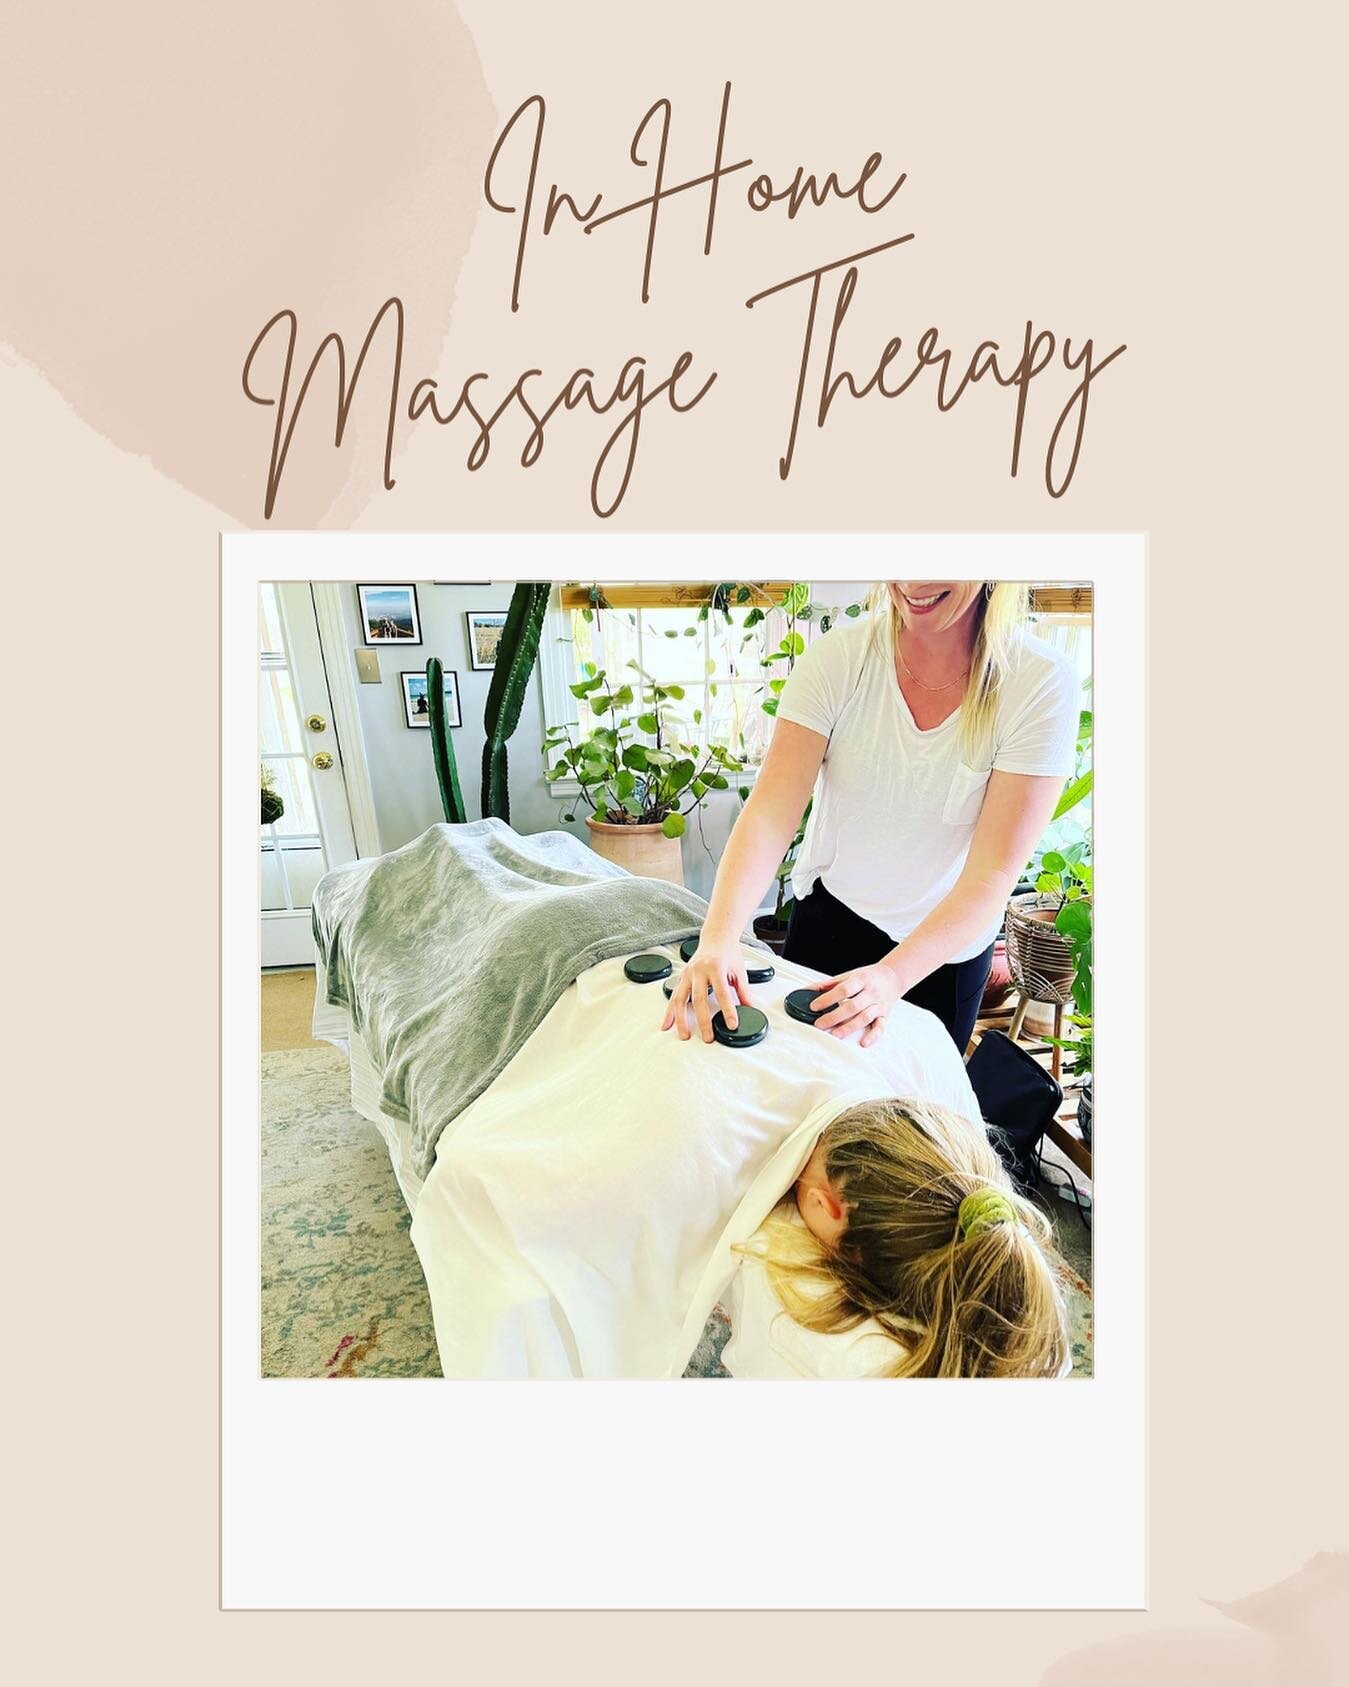 While a majority of people are concerned about their health and well-being, many find it difficult to fit &lsquo;me time&rsquo; into their hectic schedules. 
That makes in-home massage therapy convenient. &nbsp;So let relaxation and therapeutic massa